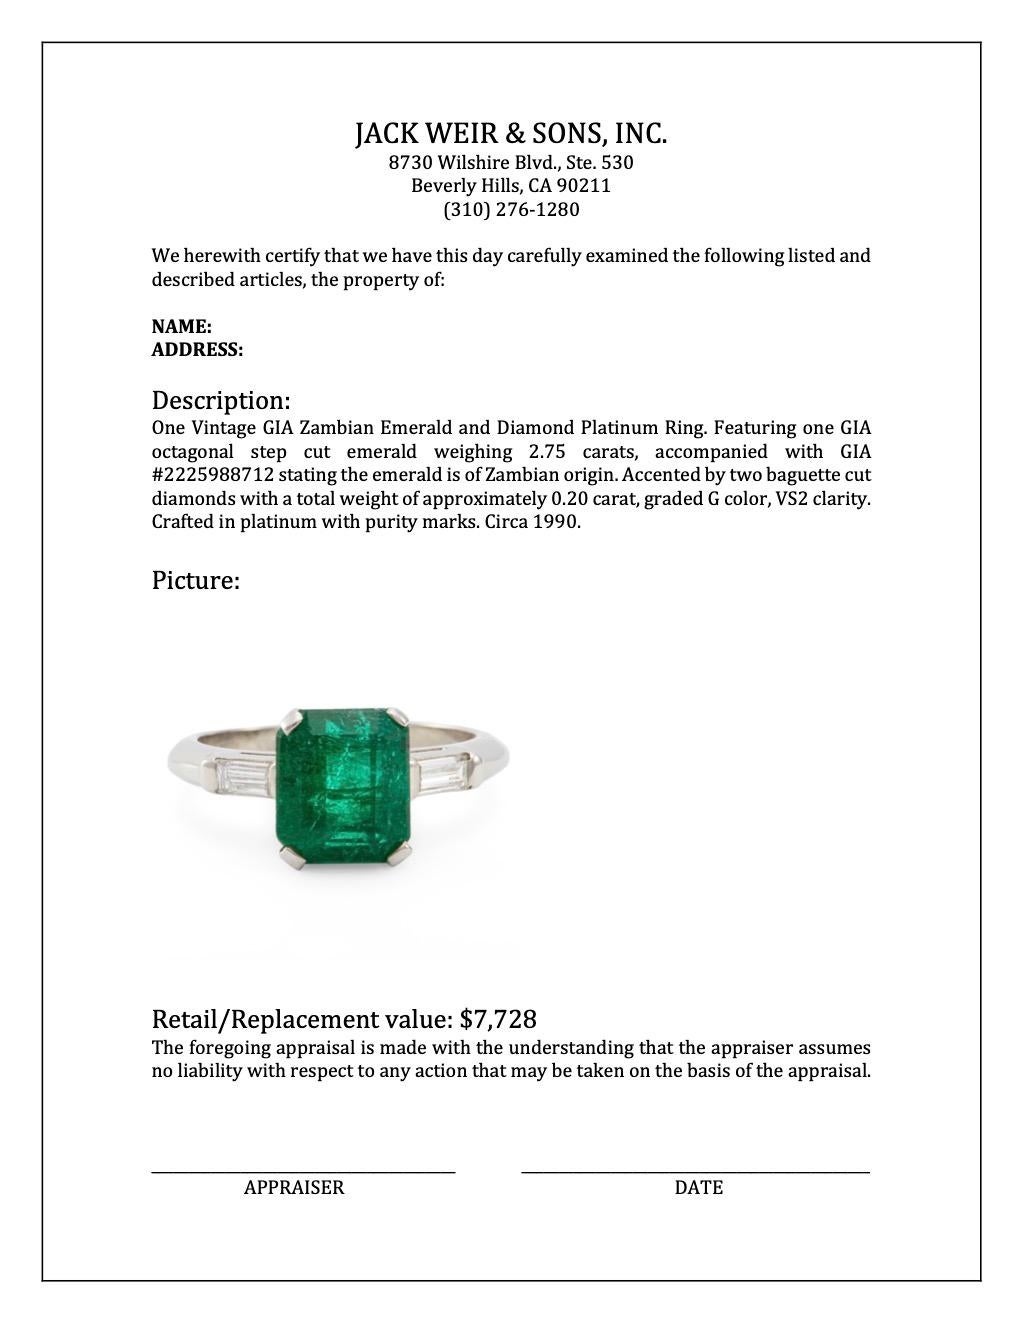 Vintage GIA Zambian Emerald and Diamond Platinum Ring For Sale 2